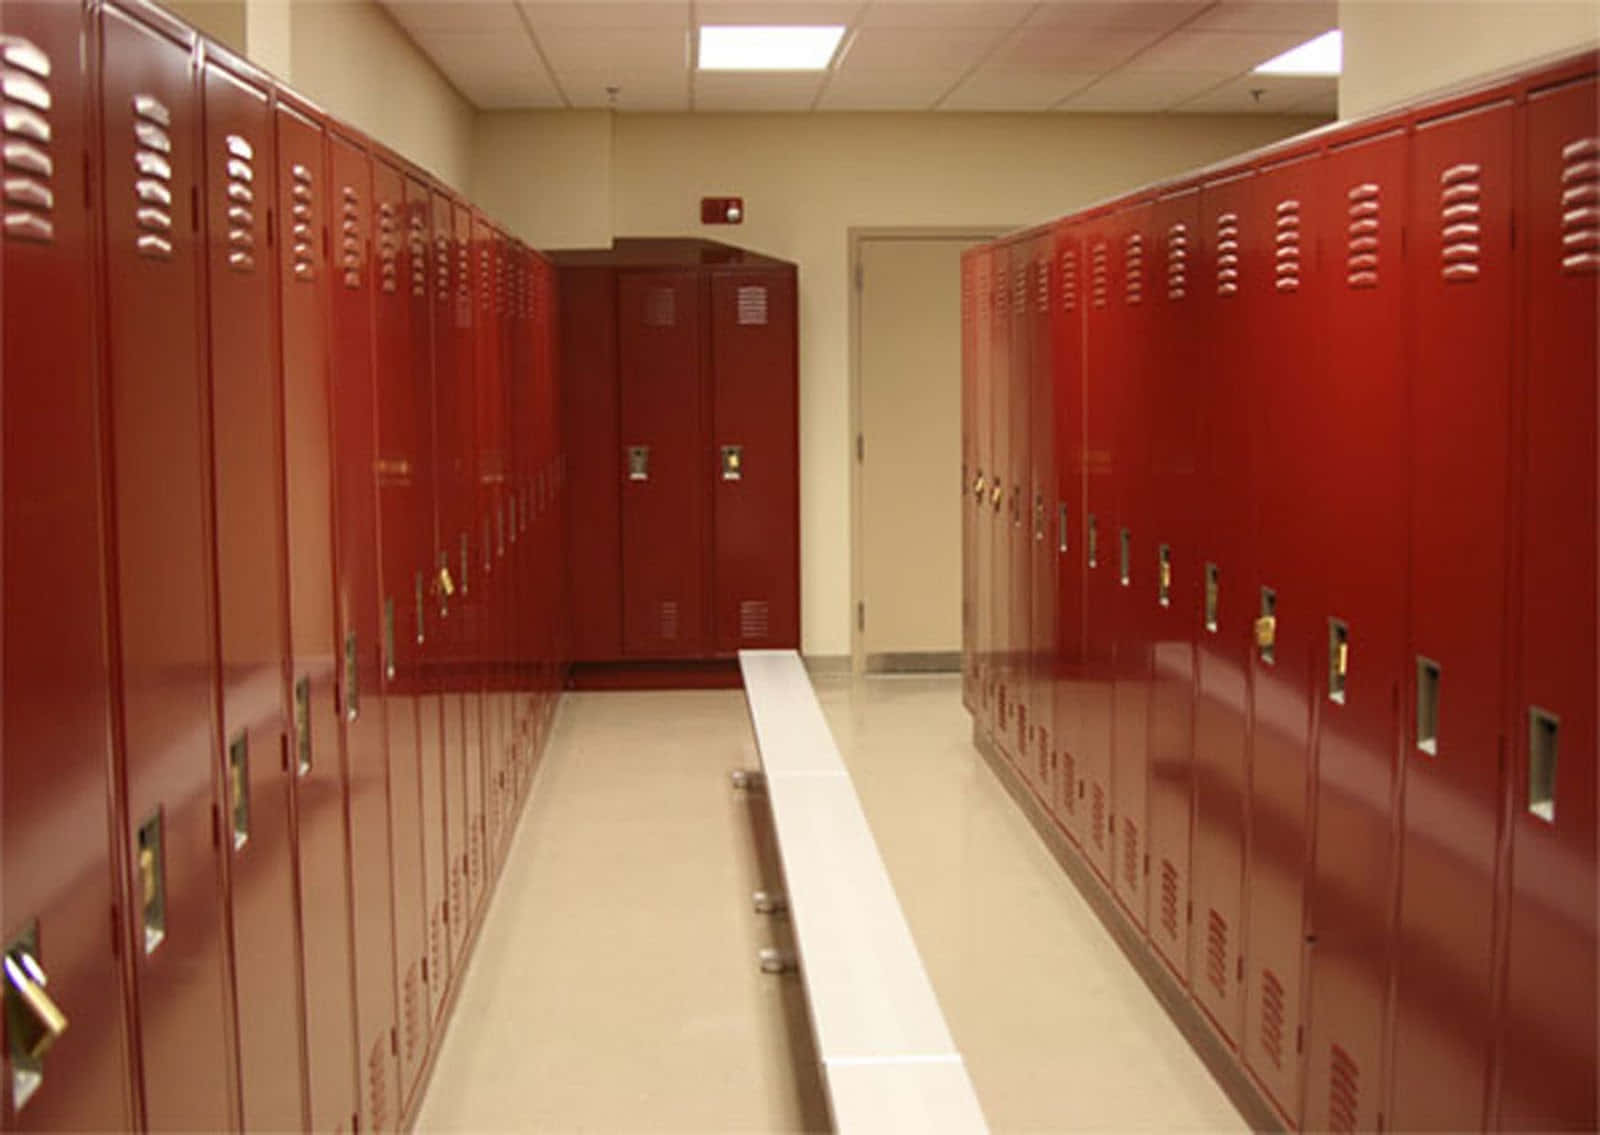 A Row Of Red Lockers In A Hallway